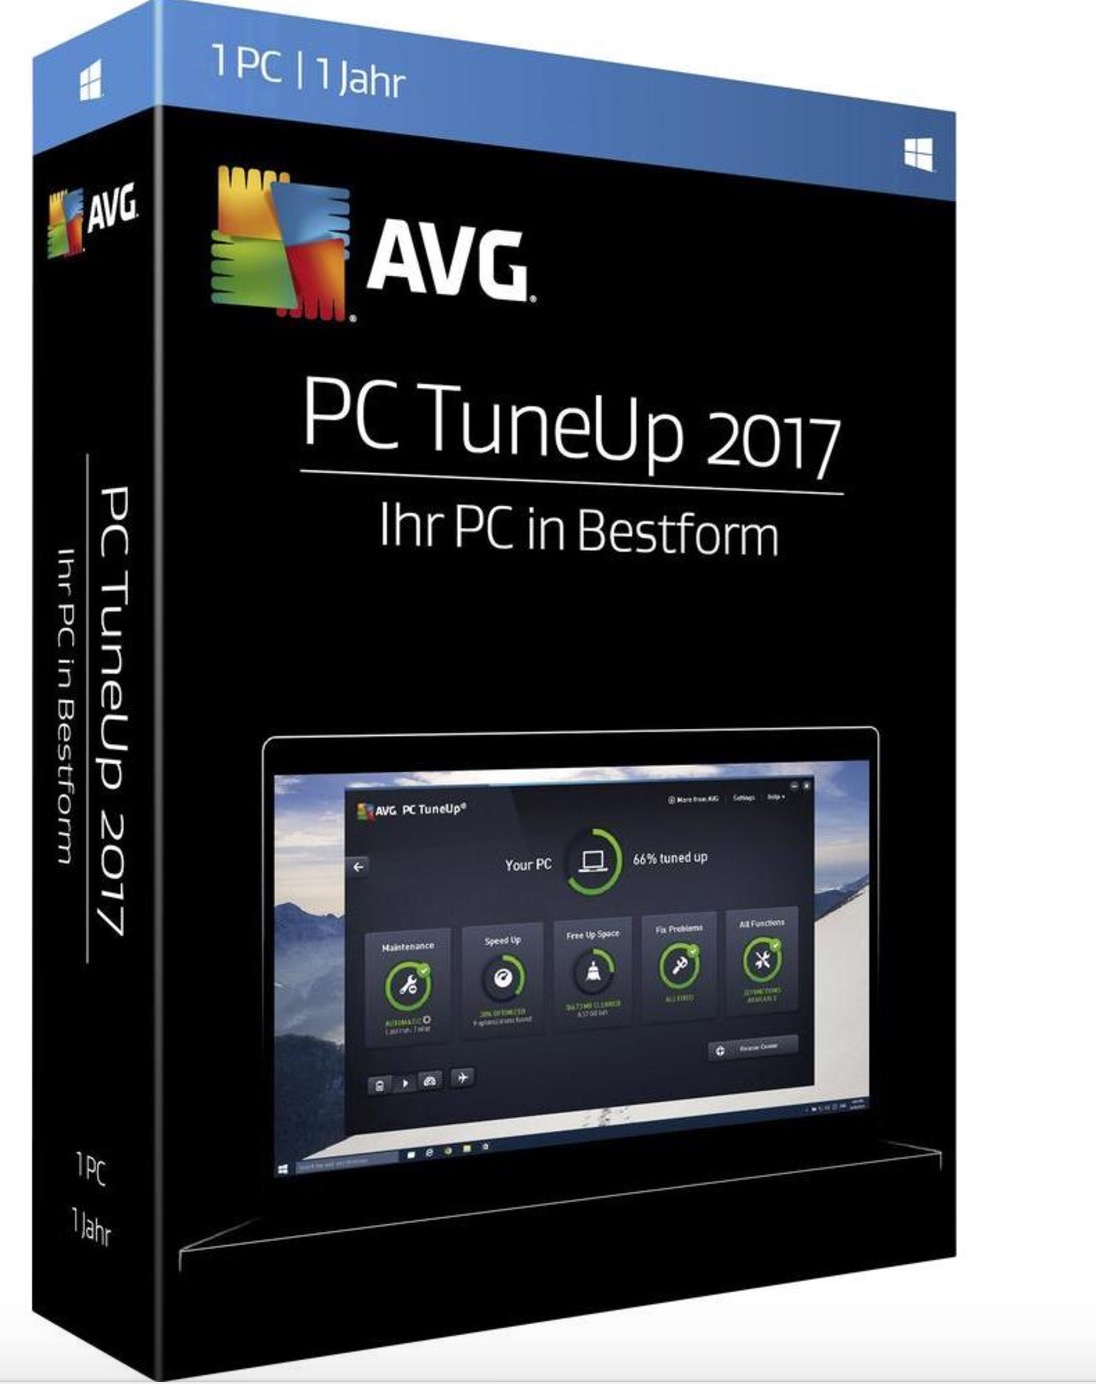 AVG TuneUp CD Key (Digital Download) - Various Options Available: 5 Devices